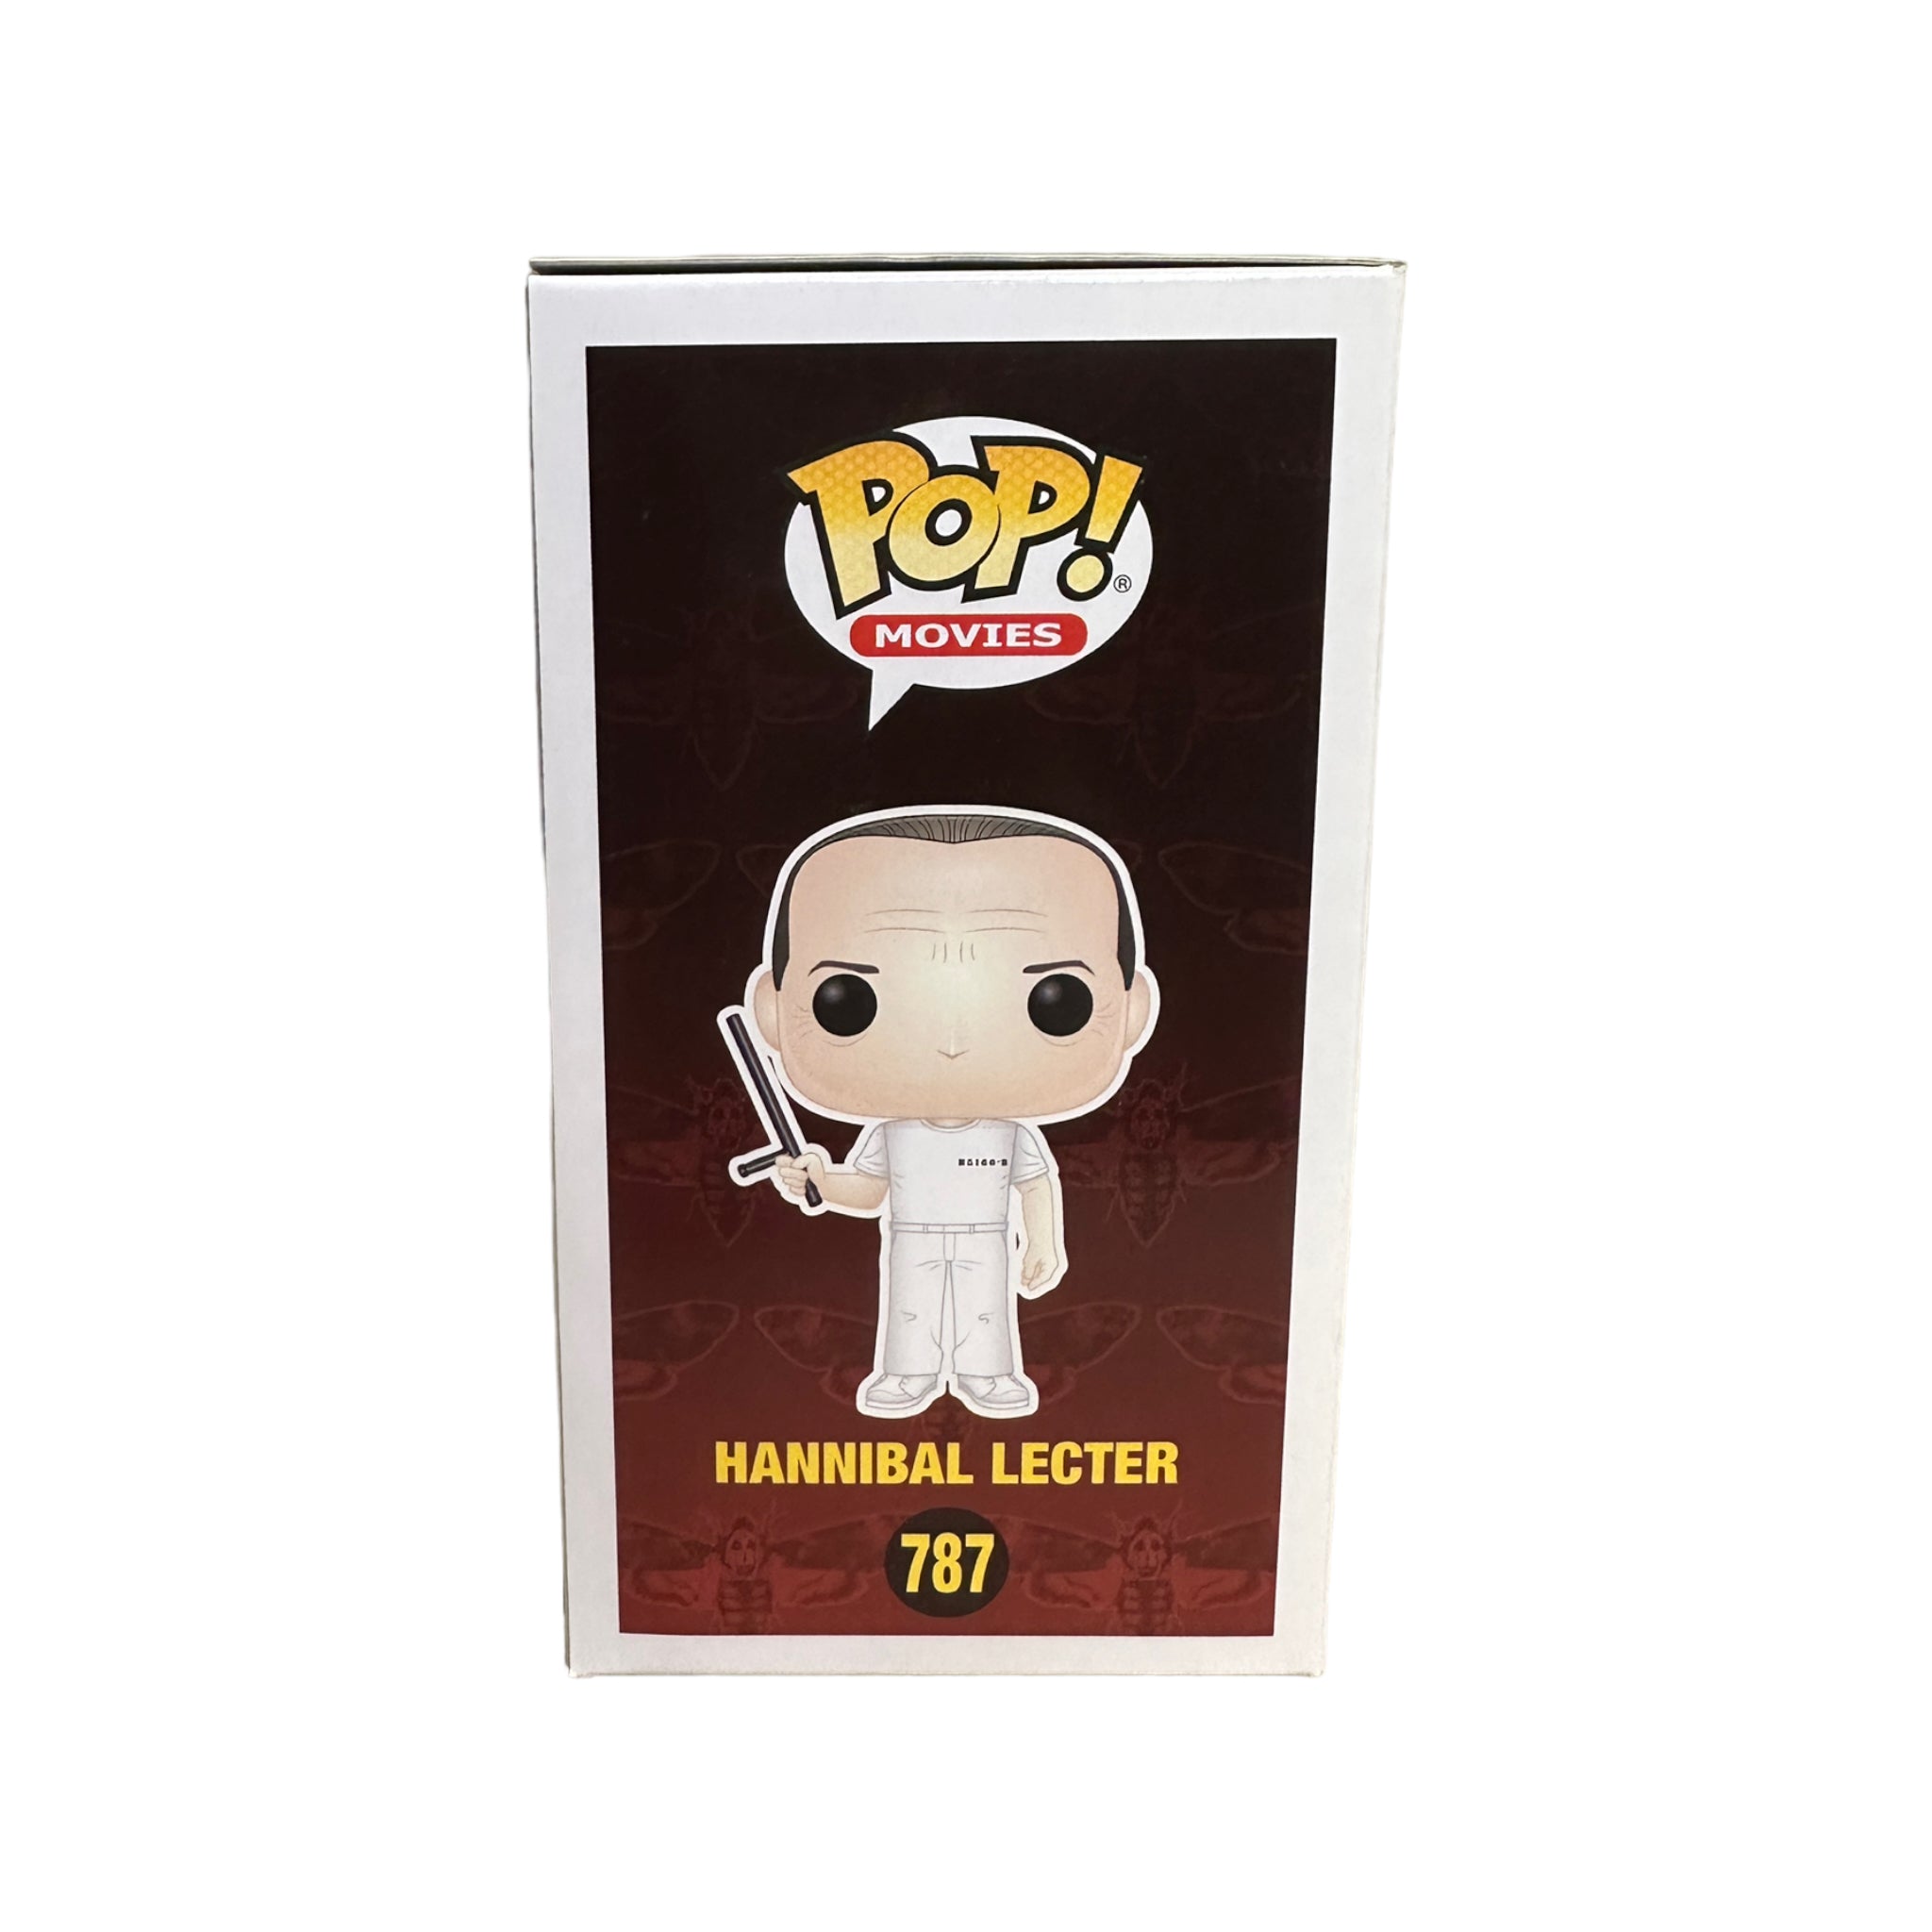 Hannibal Lecter #787 Funko Pop! - The Silence of The Lambs - 2019 Pop! - Condition 8.75/10